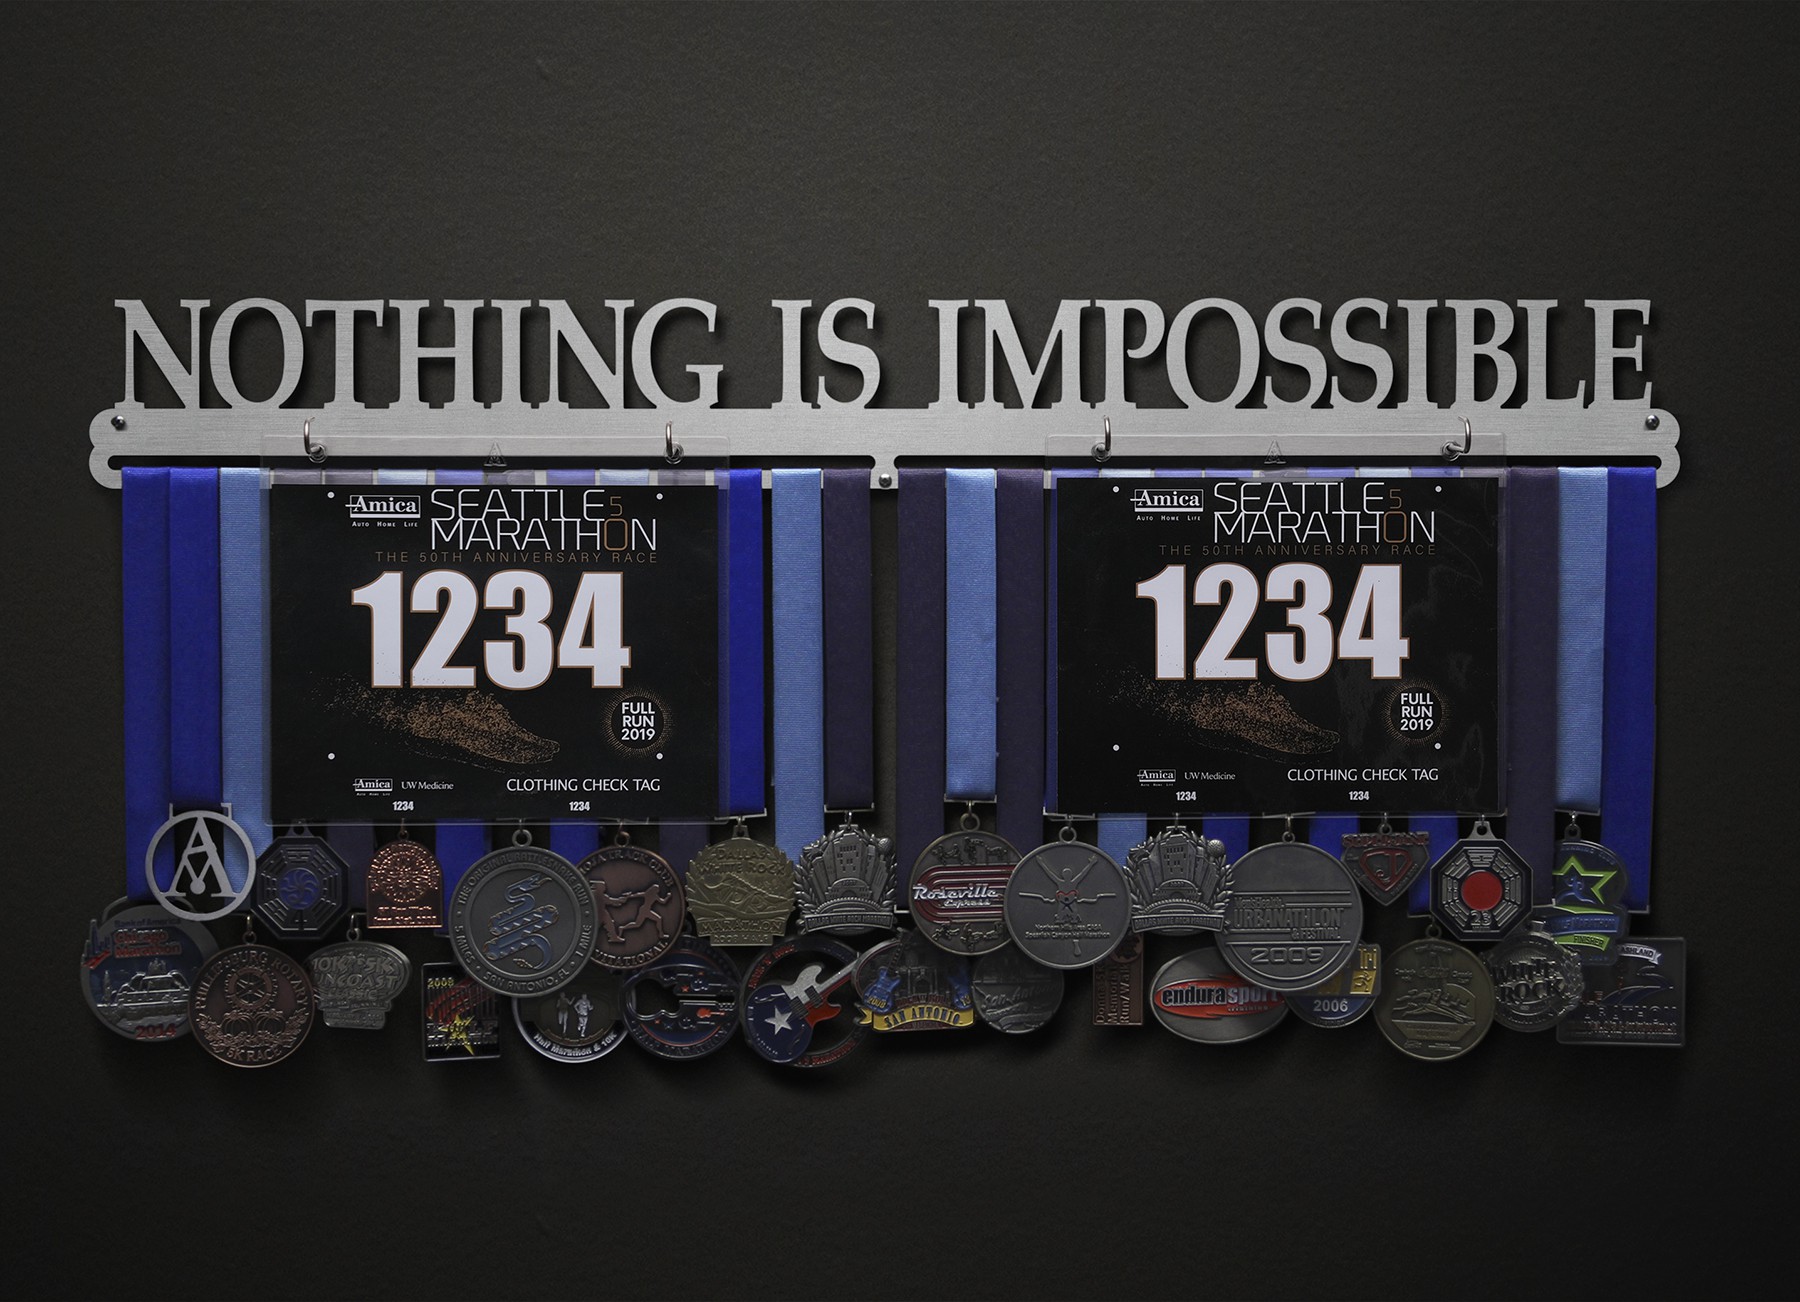 Nothing Is Impossible Bib and Medal Display